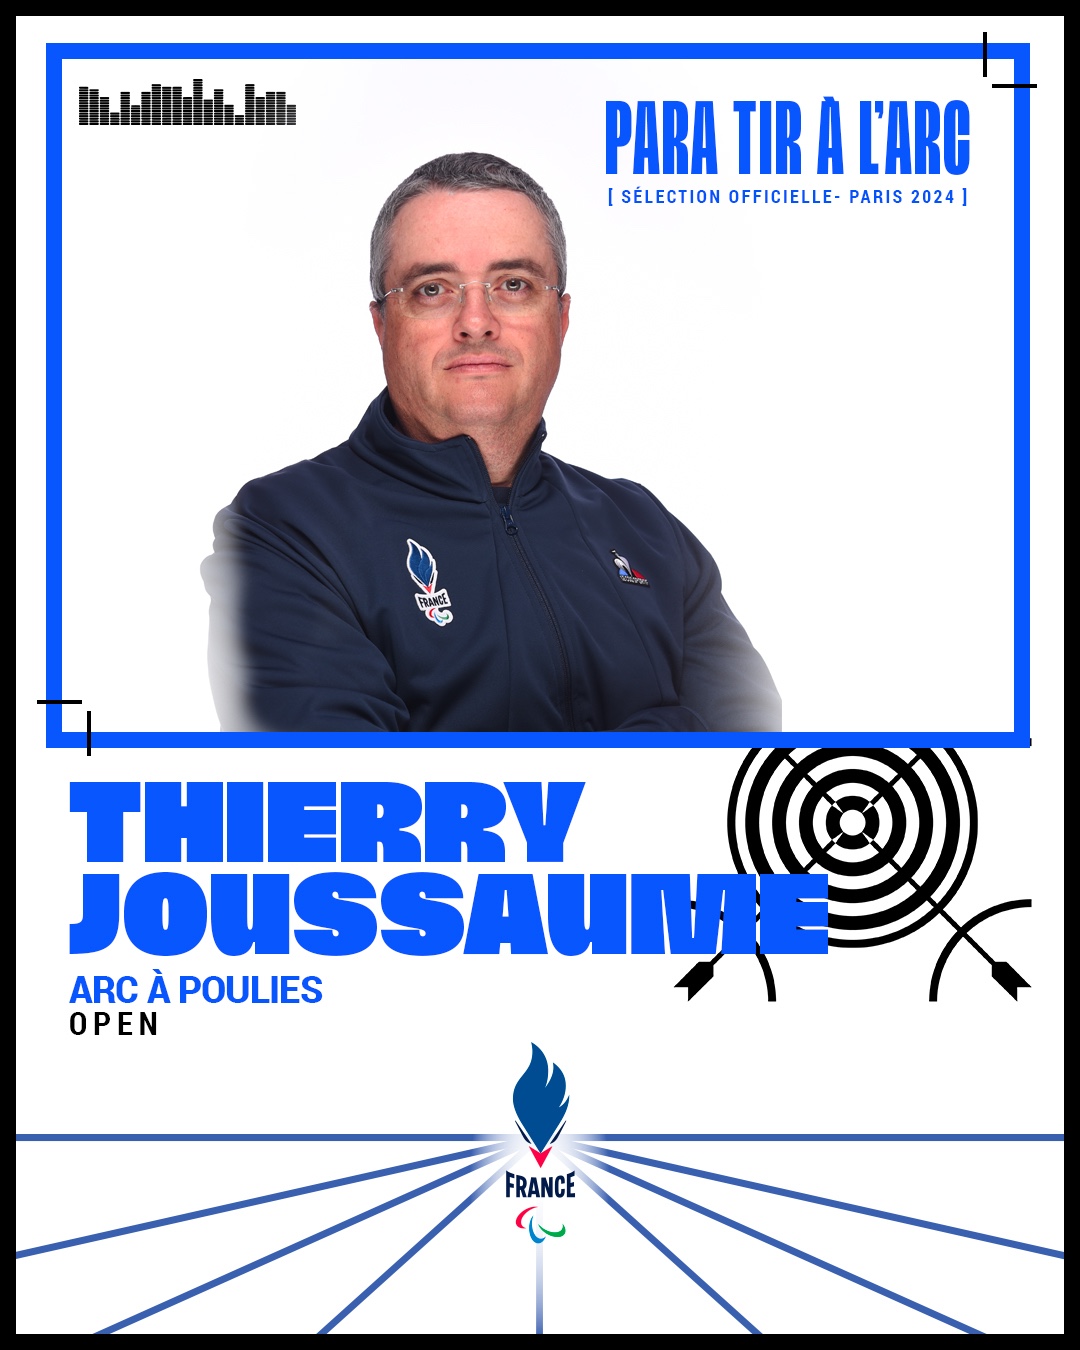 Thierry Joussaume